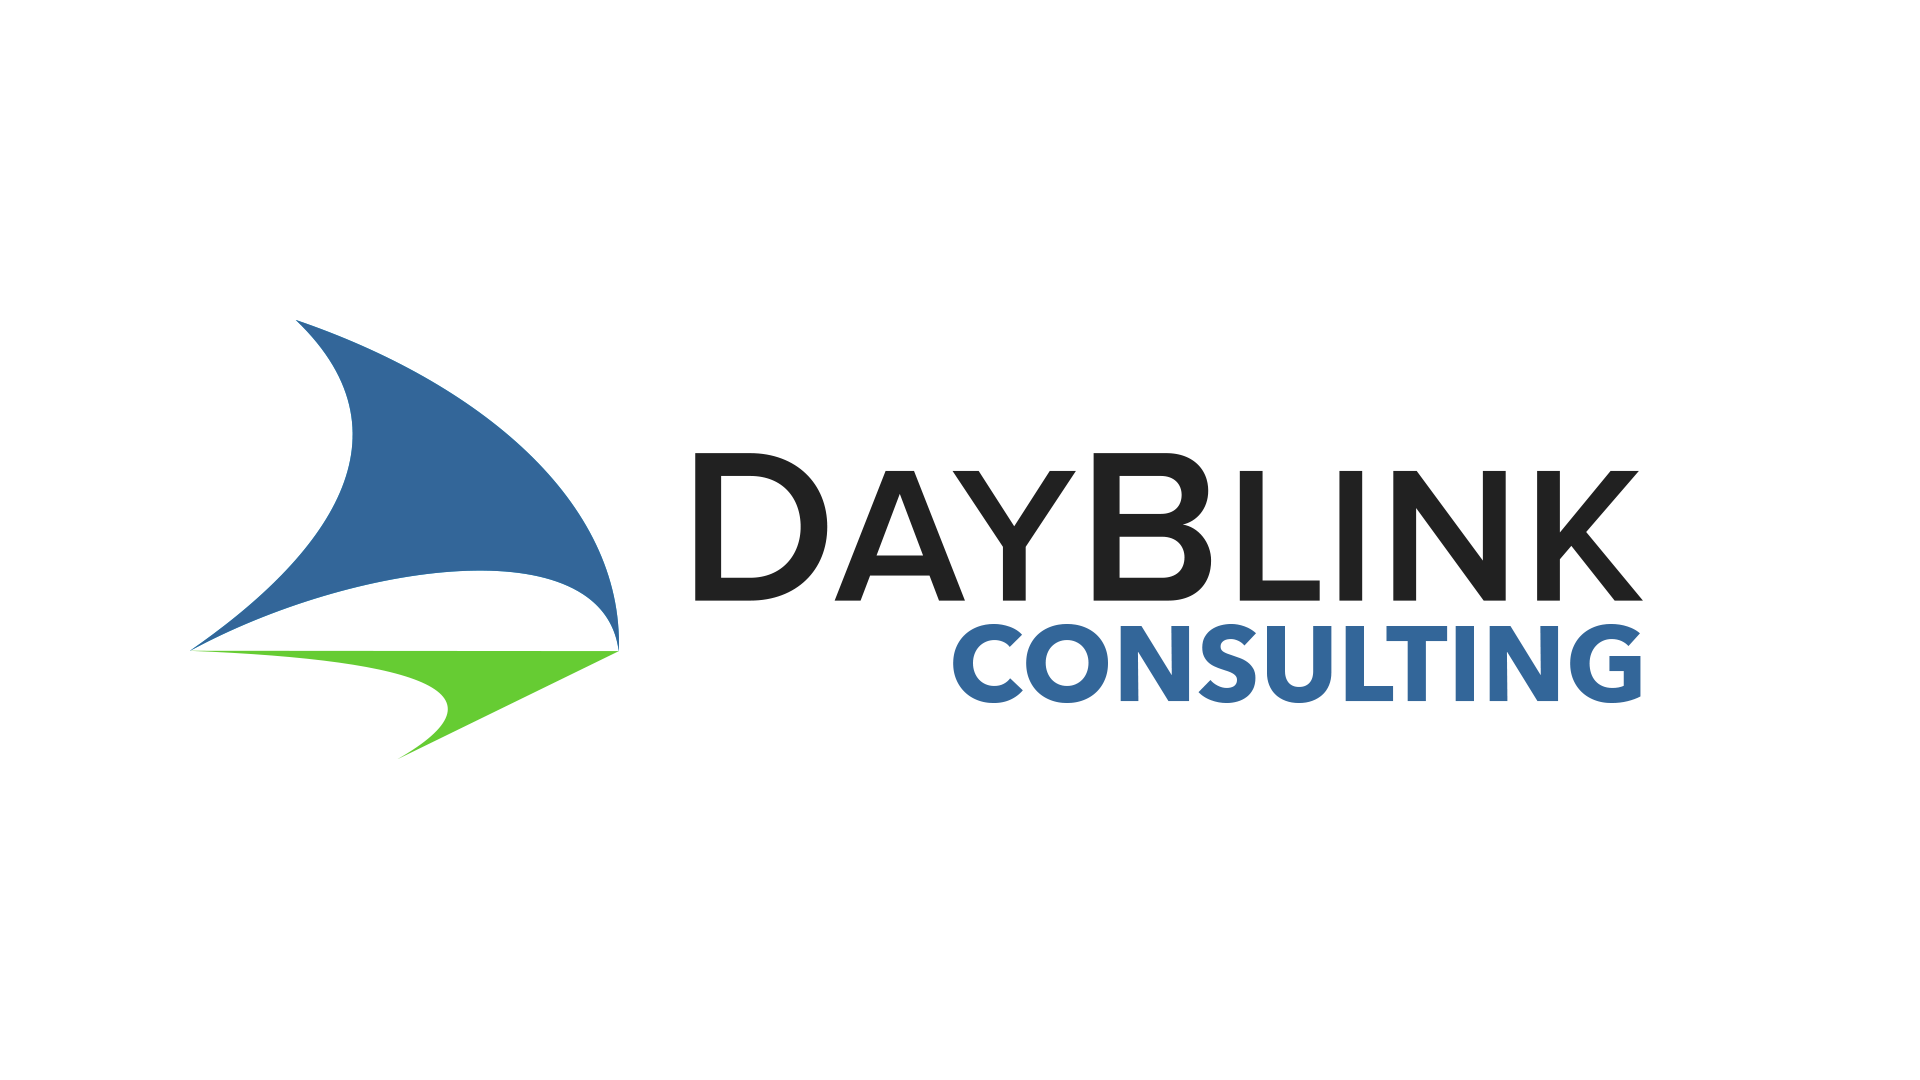 Dayblink Consulting